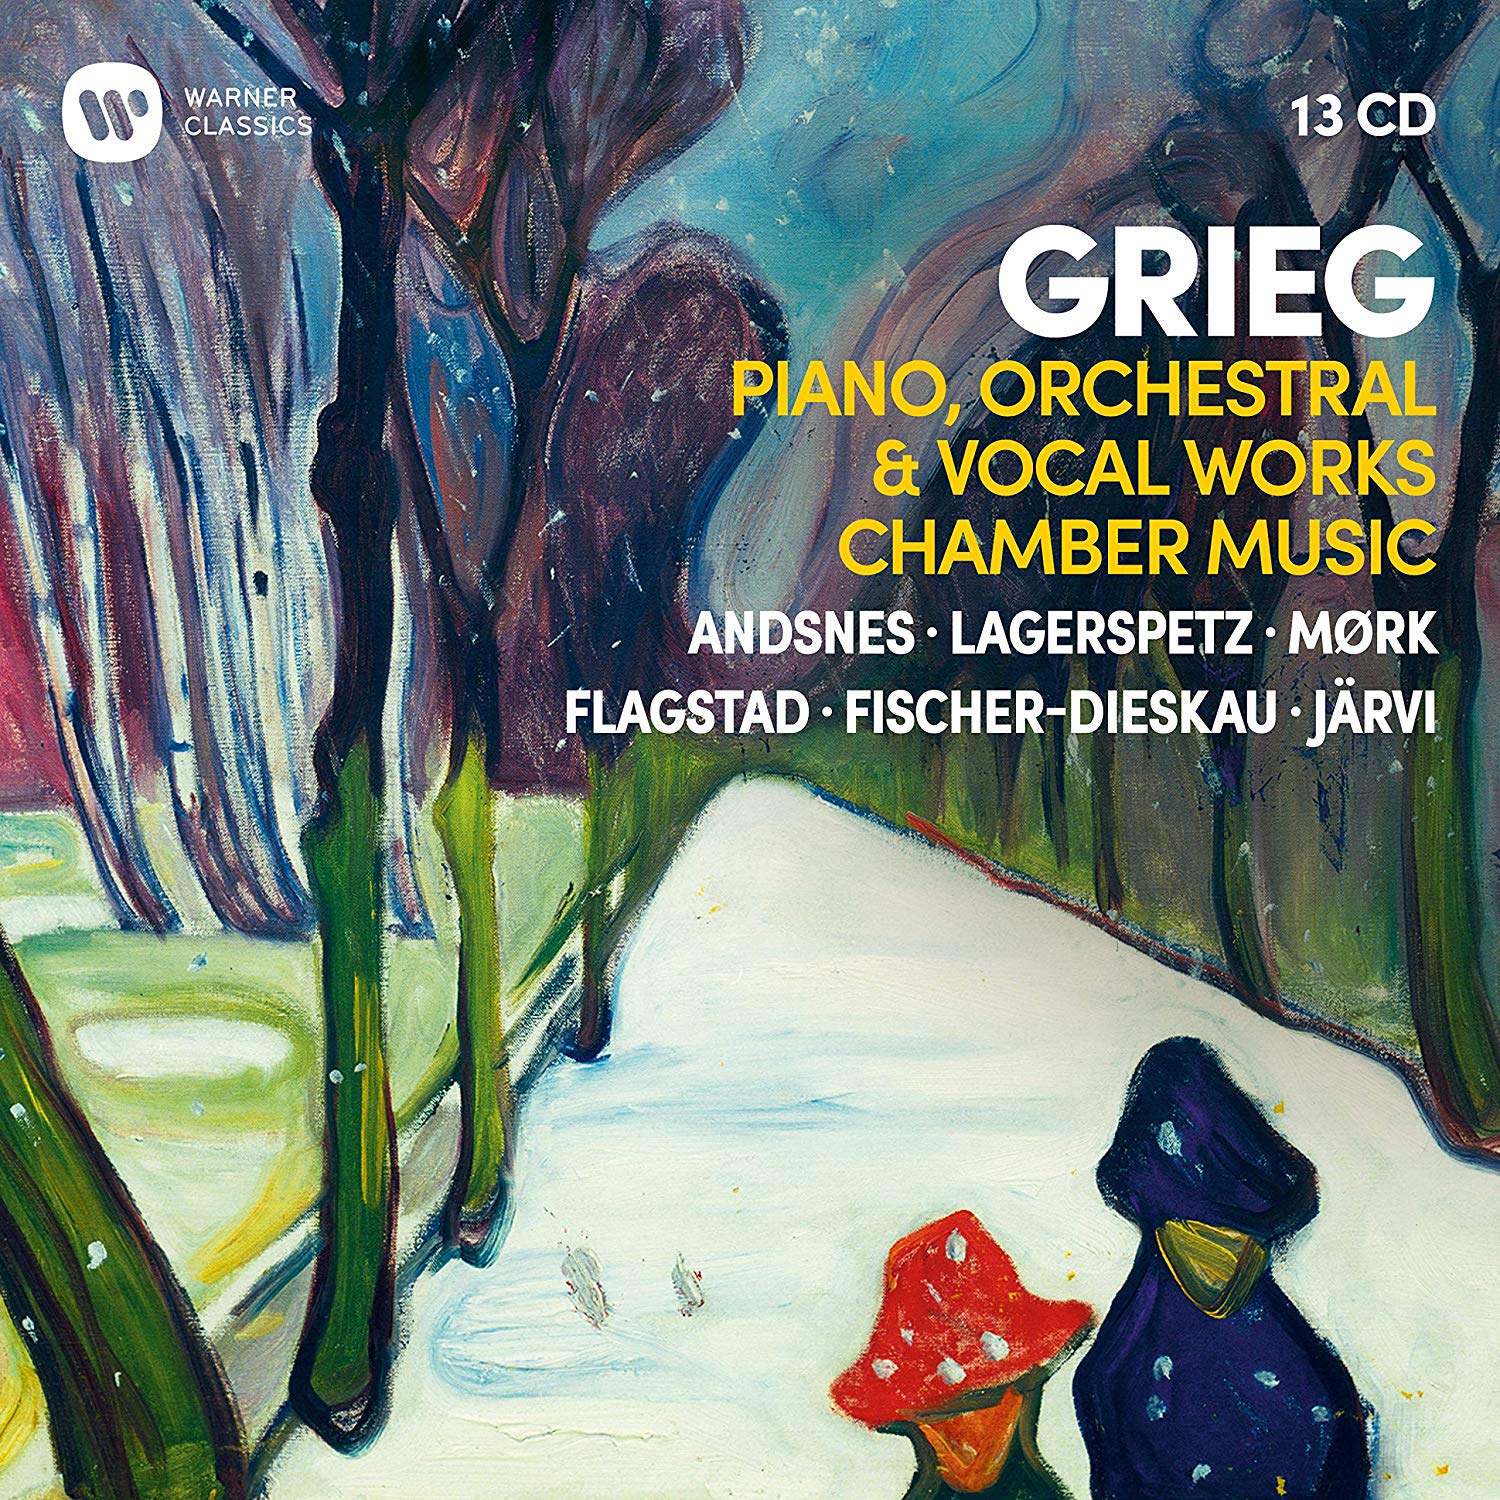 Grieg Piano Orchestral Vocal Works Chamber Music Andsnes